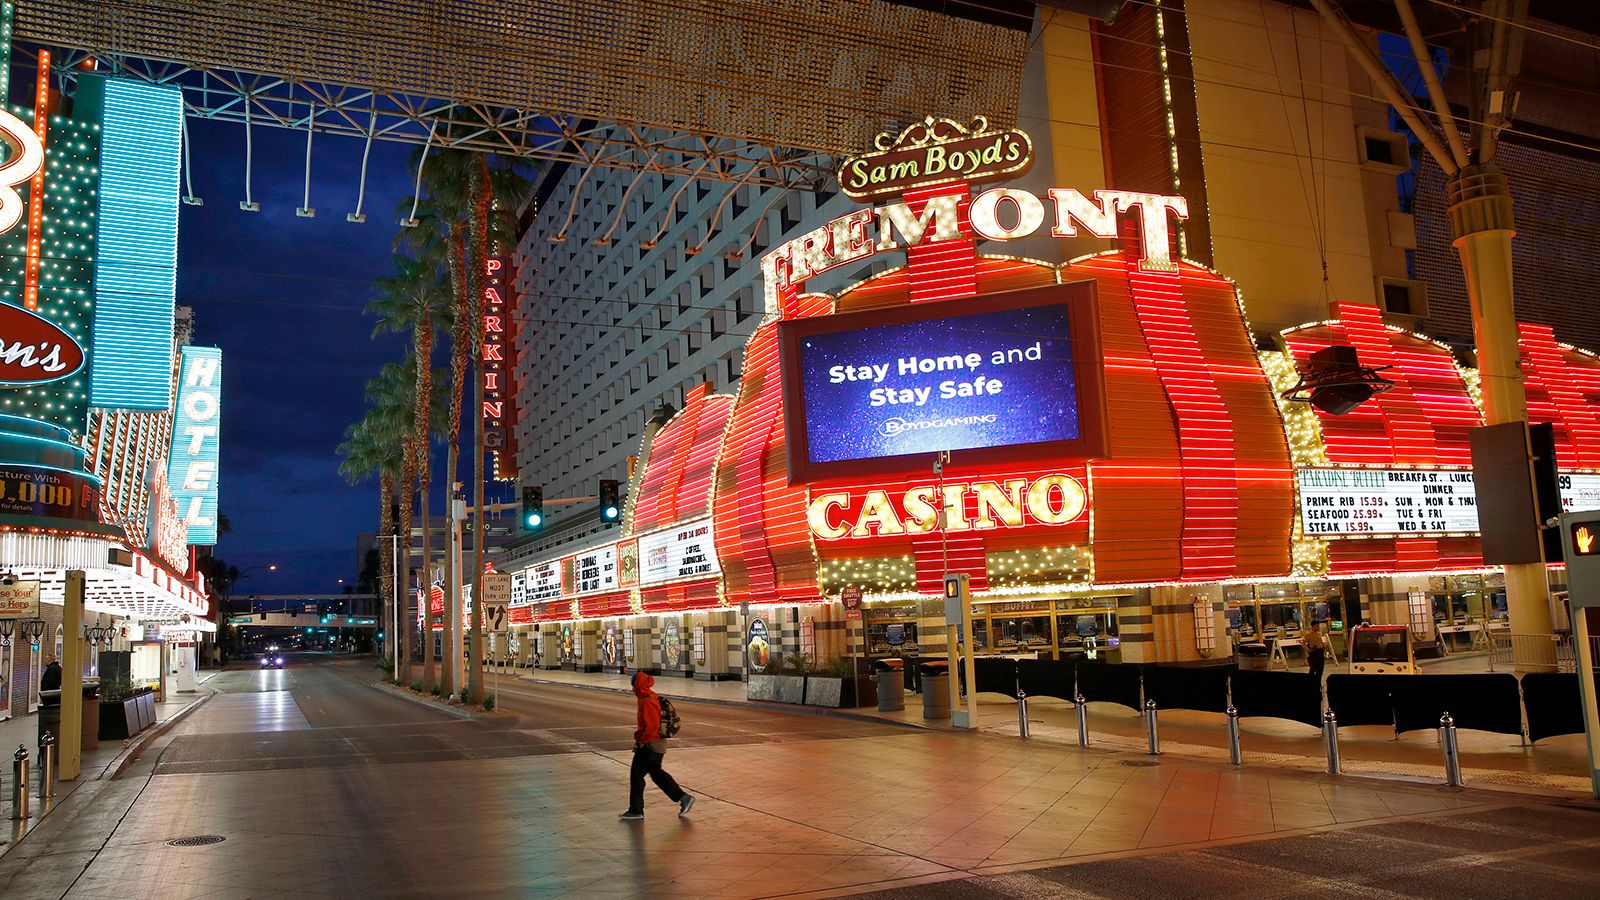 Las Vegas comes alive with the reopening of the casinos